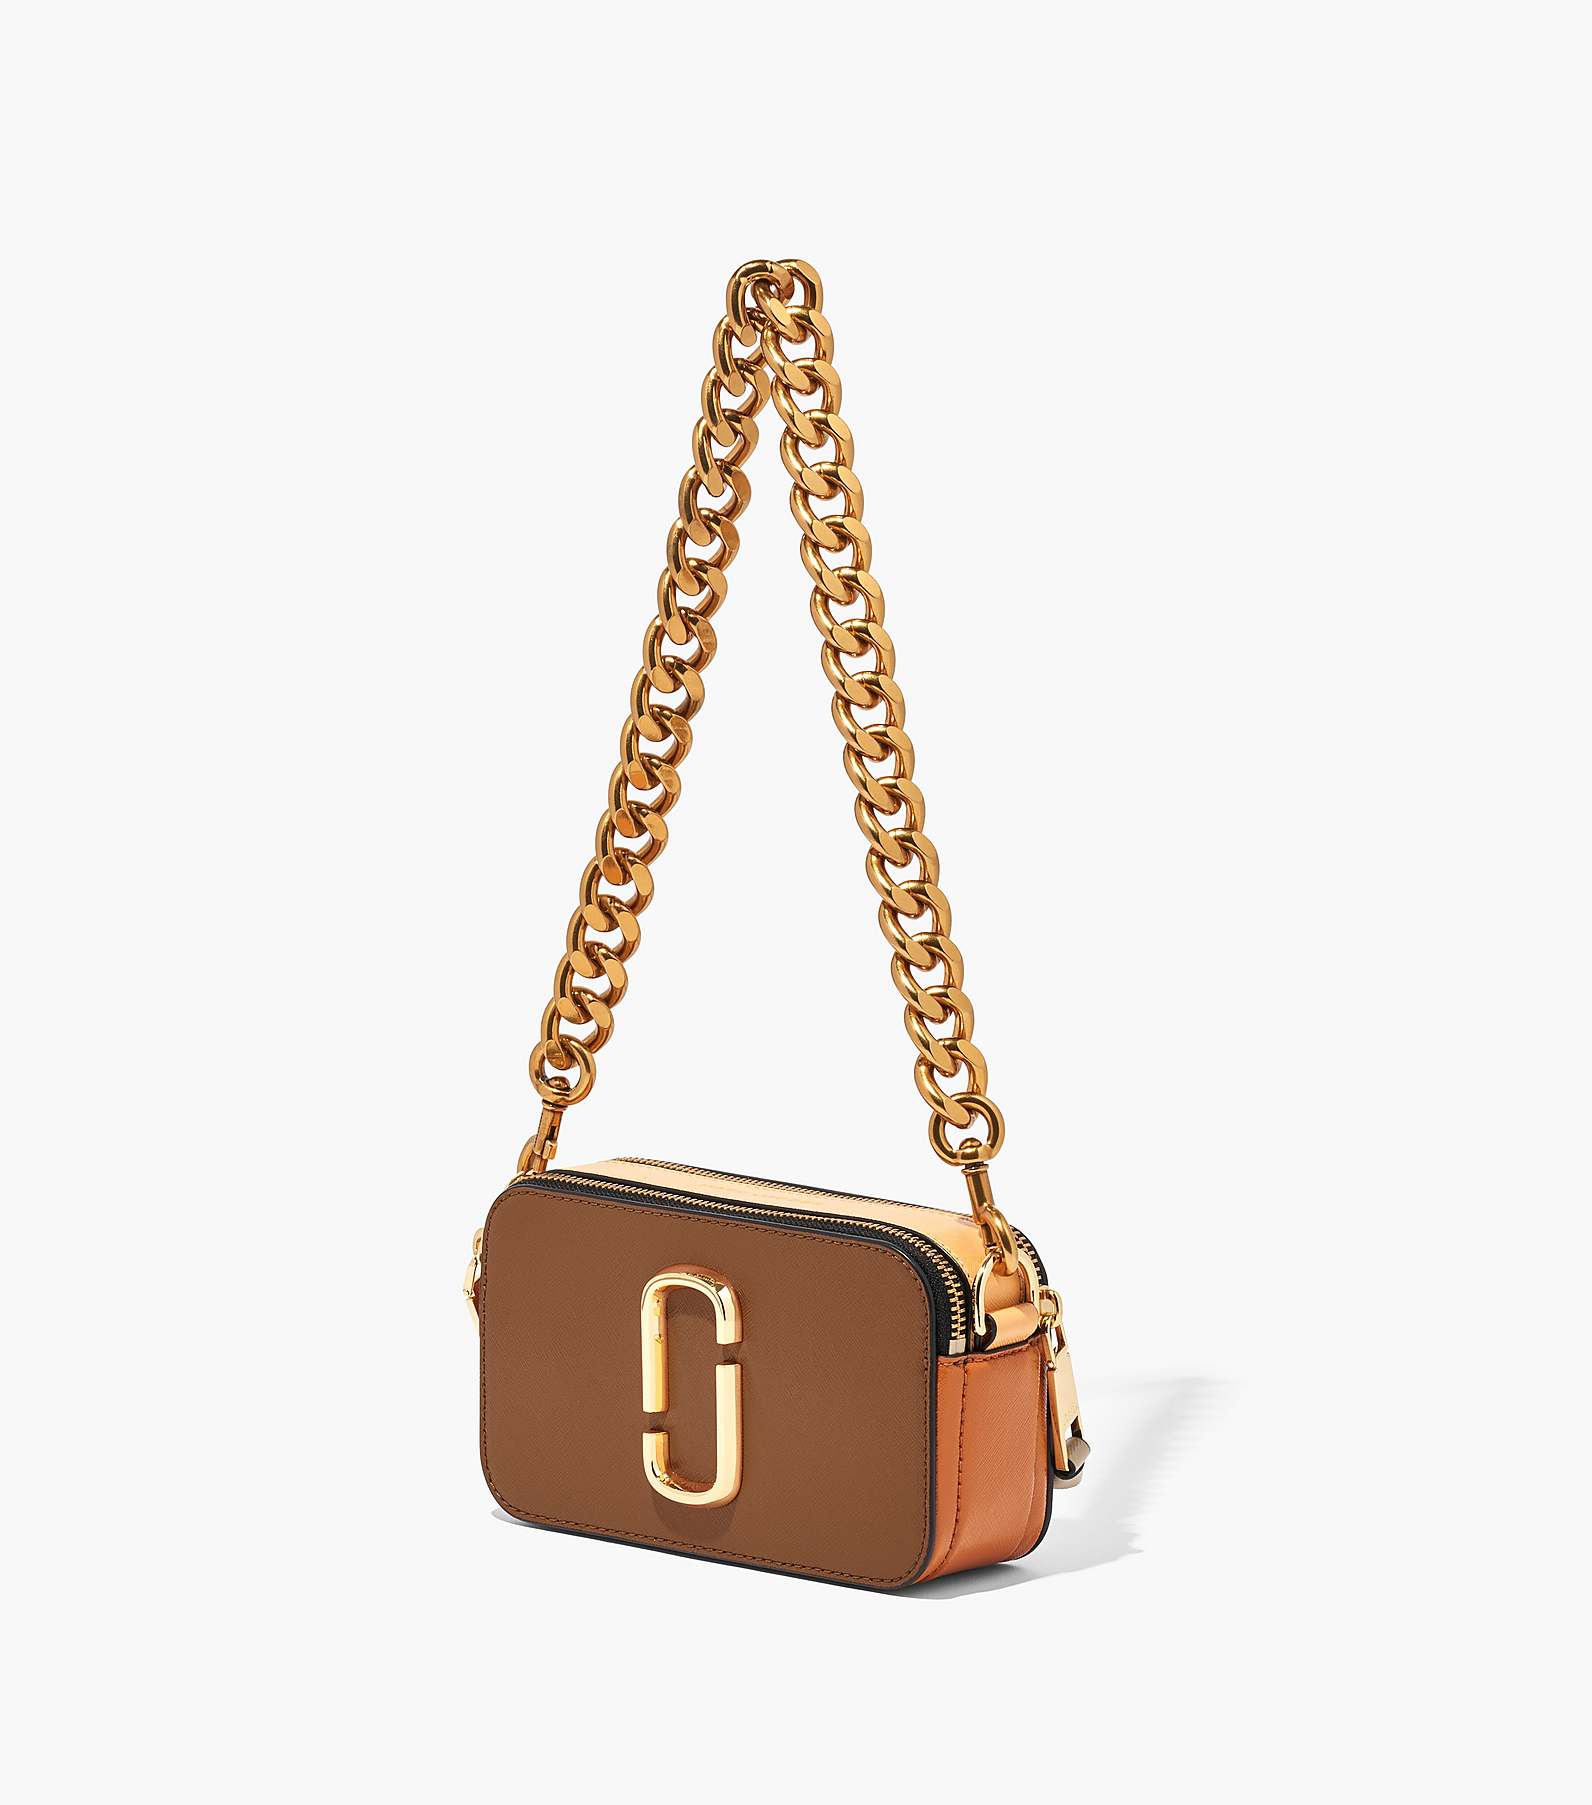 The Chainlink Shoulder Strap(Straps and Charms)